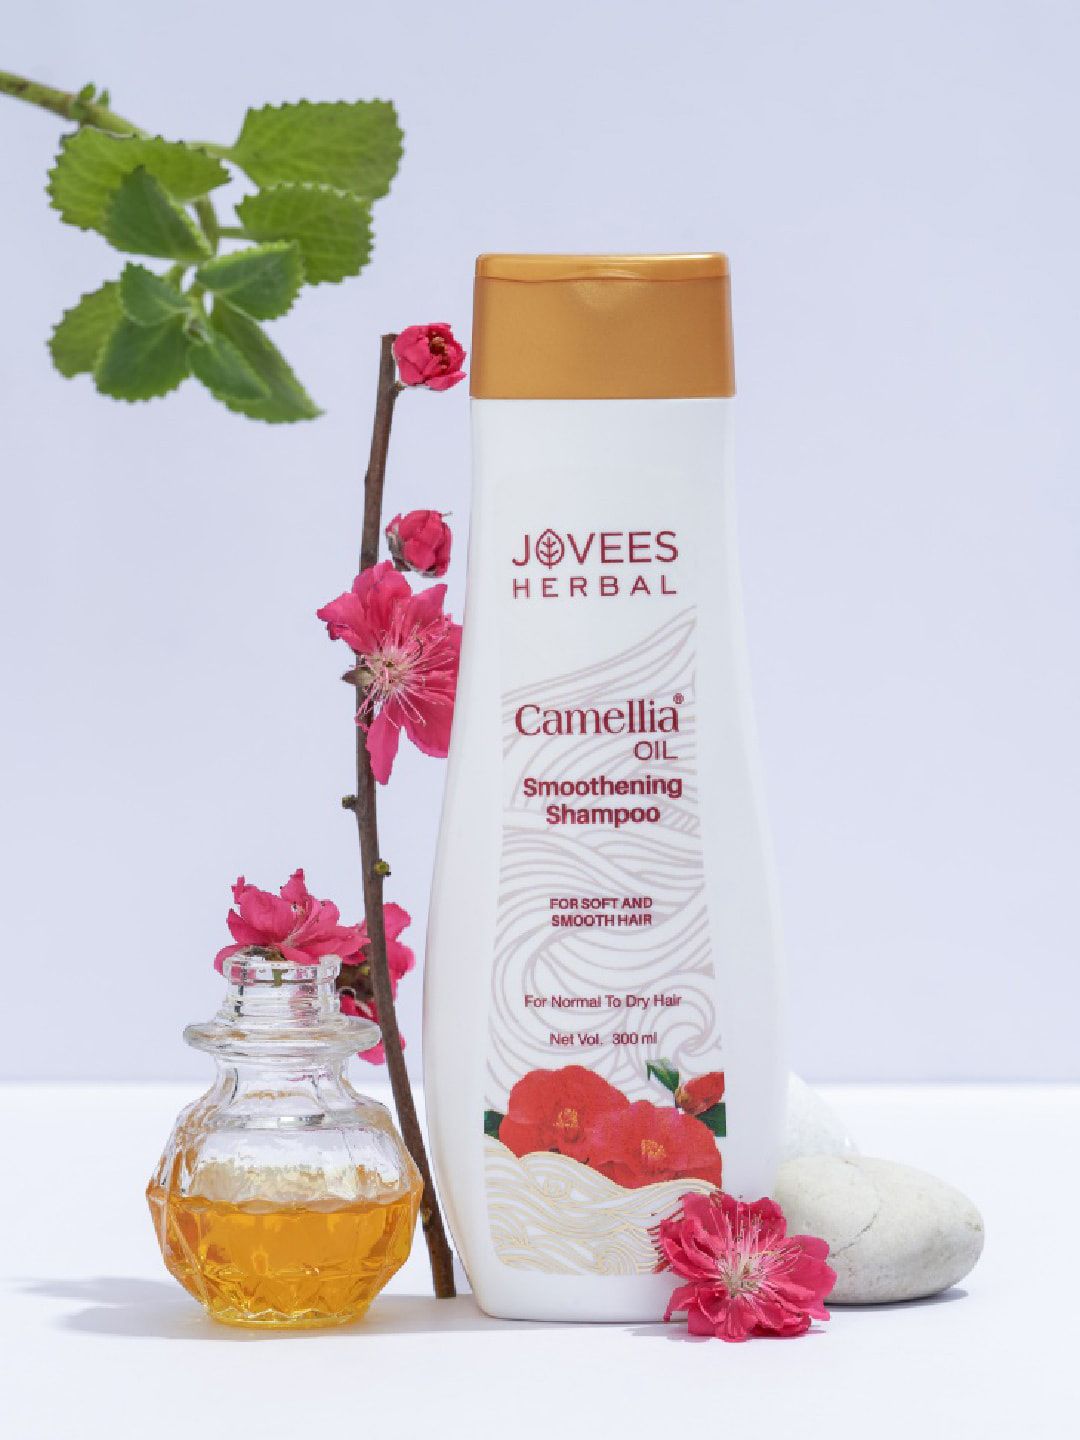 Jovees  Camellia Oil Smoothening Shampoo 300 ml Price in India